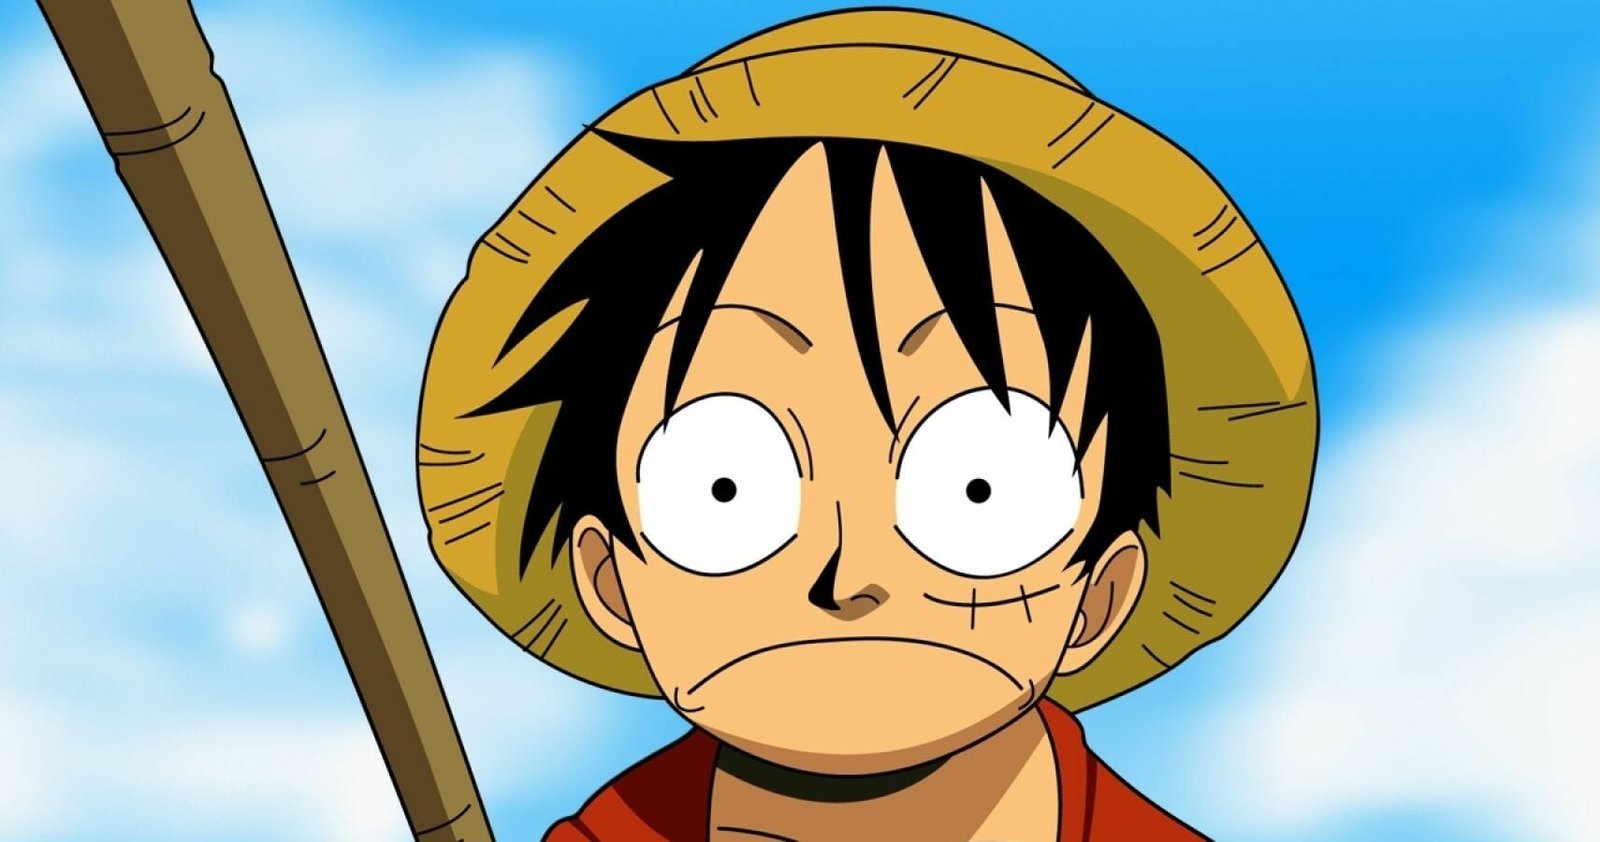 ENFP character Monkey D. Luffy